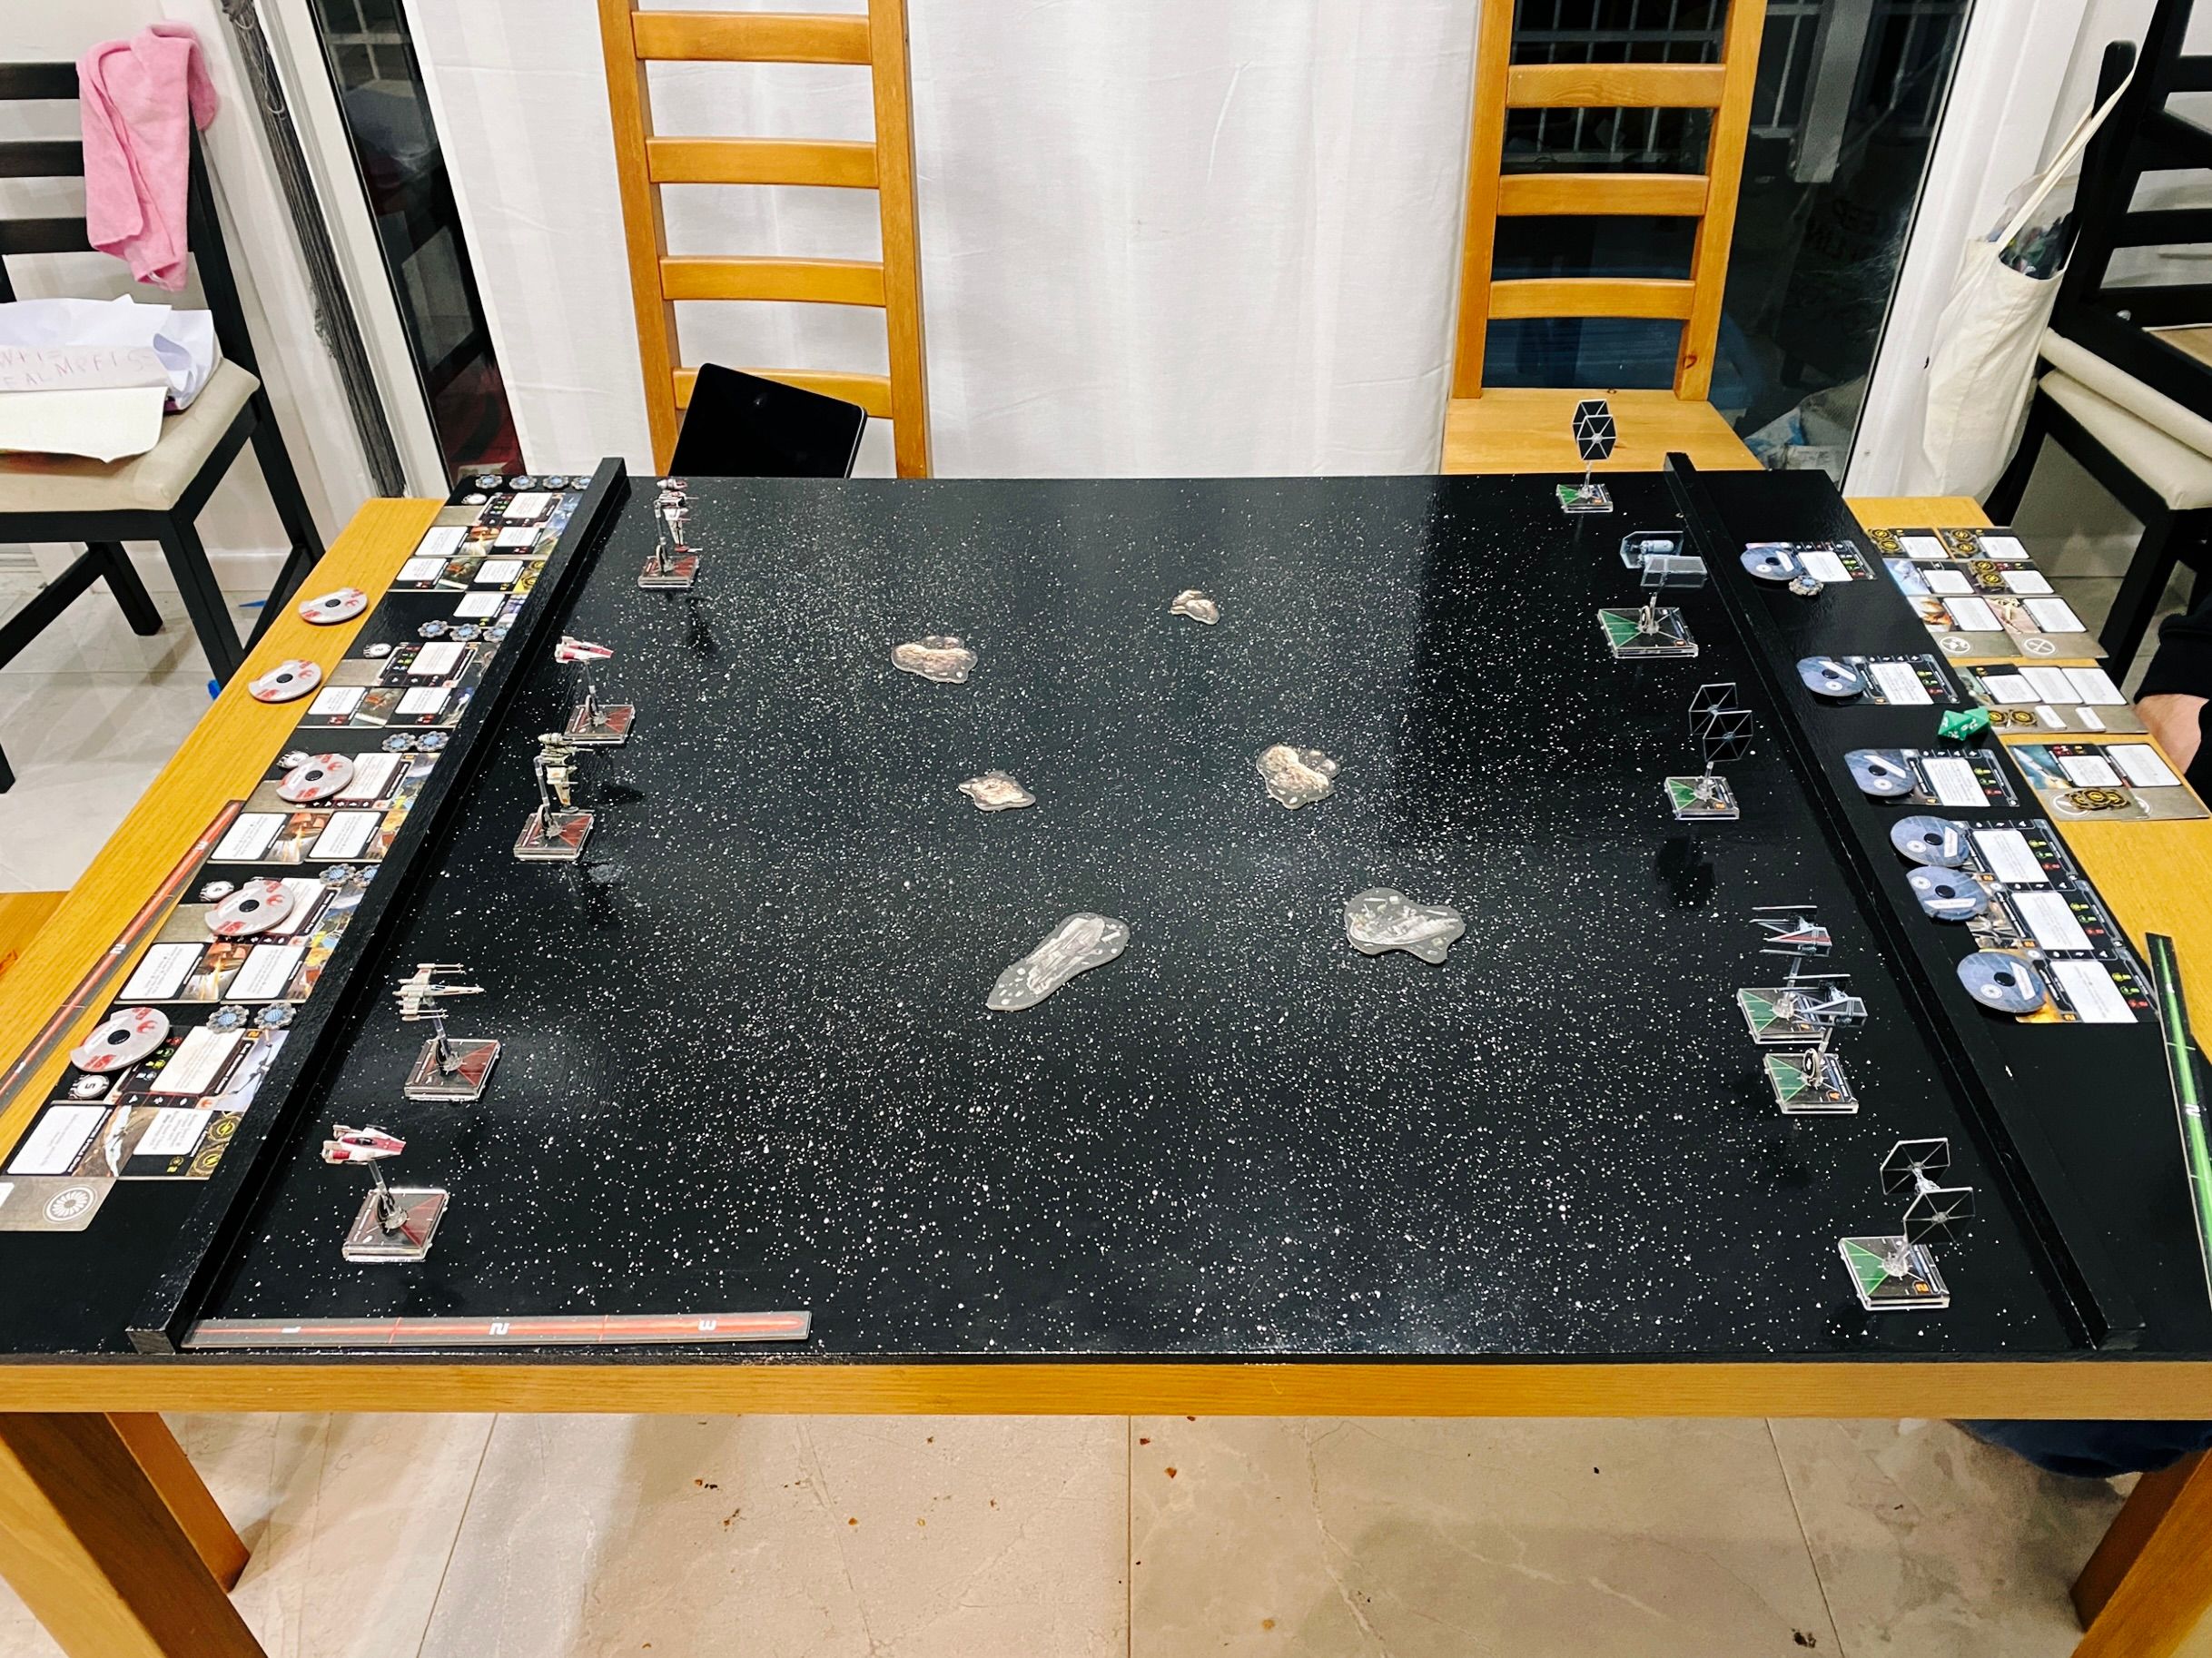 A photo of a big shiny black wooden board with stars painting on it, with two B-wings, two A-wings, and an X-wing on one side and a TIE Punisher, two TIE Interceptors, and three TIE Fighters on the other.